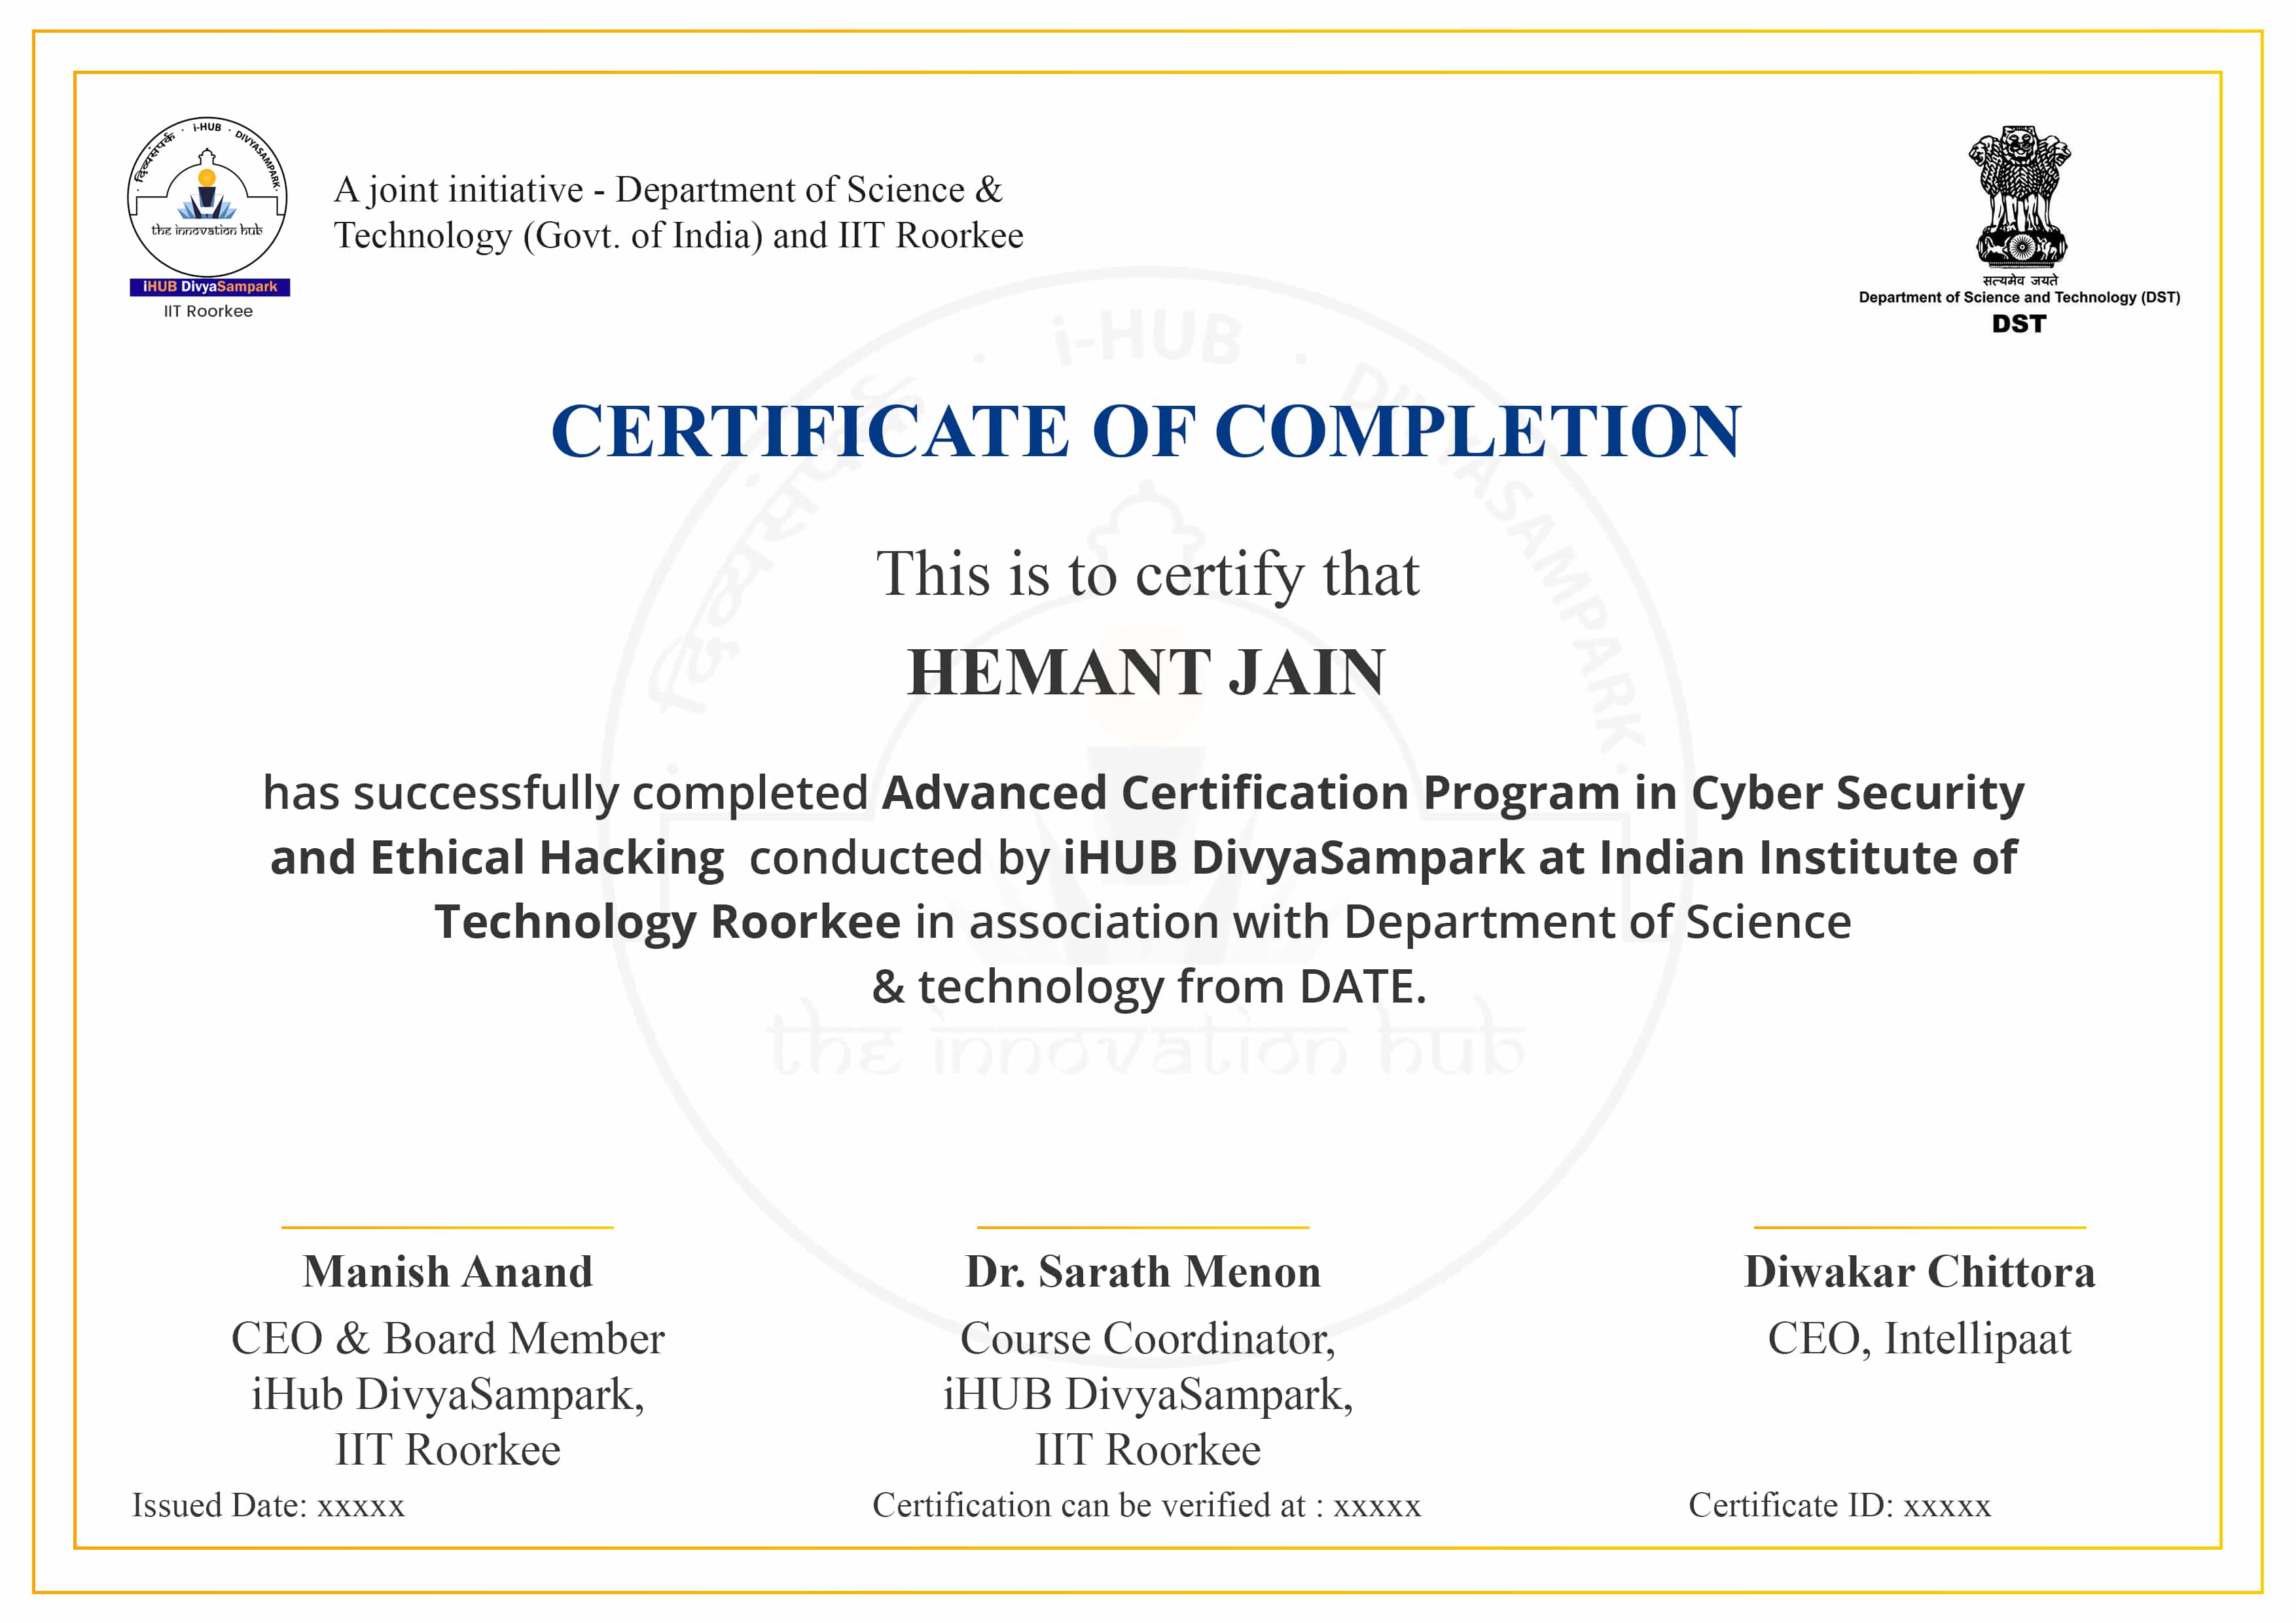 Adv. Certification Cyber Security & Ethical Hacking - IIT Roorkee iHUB